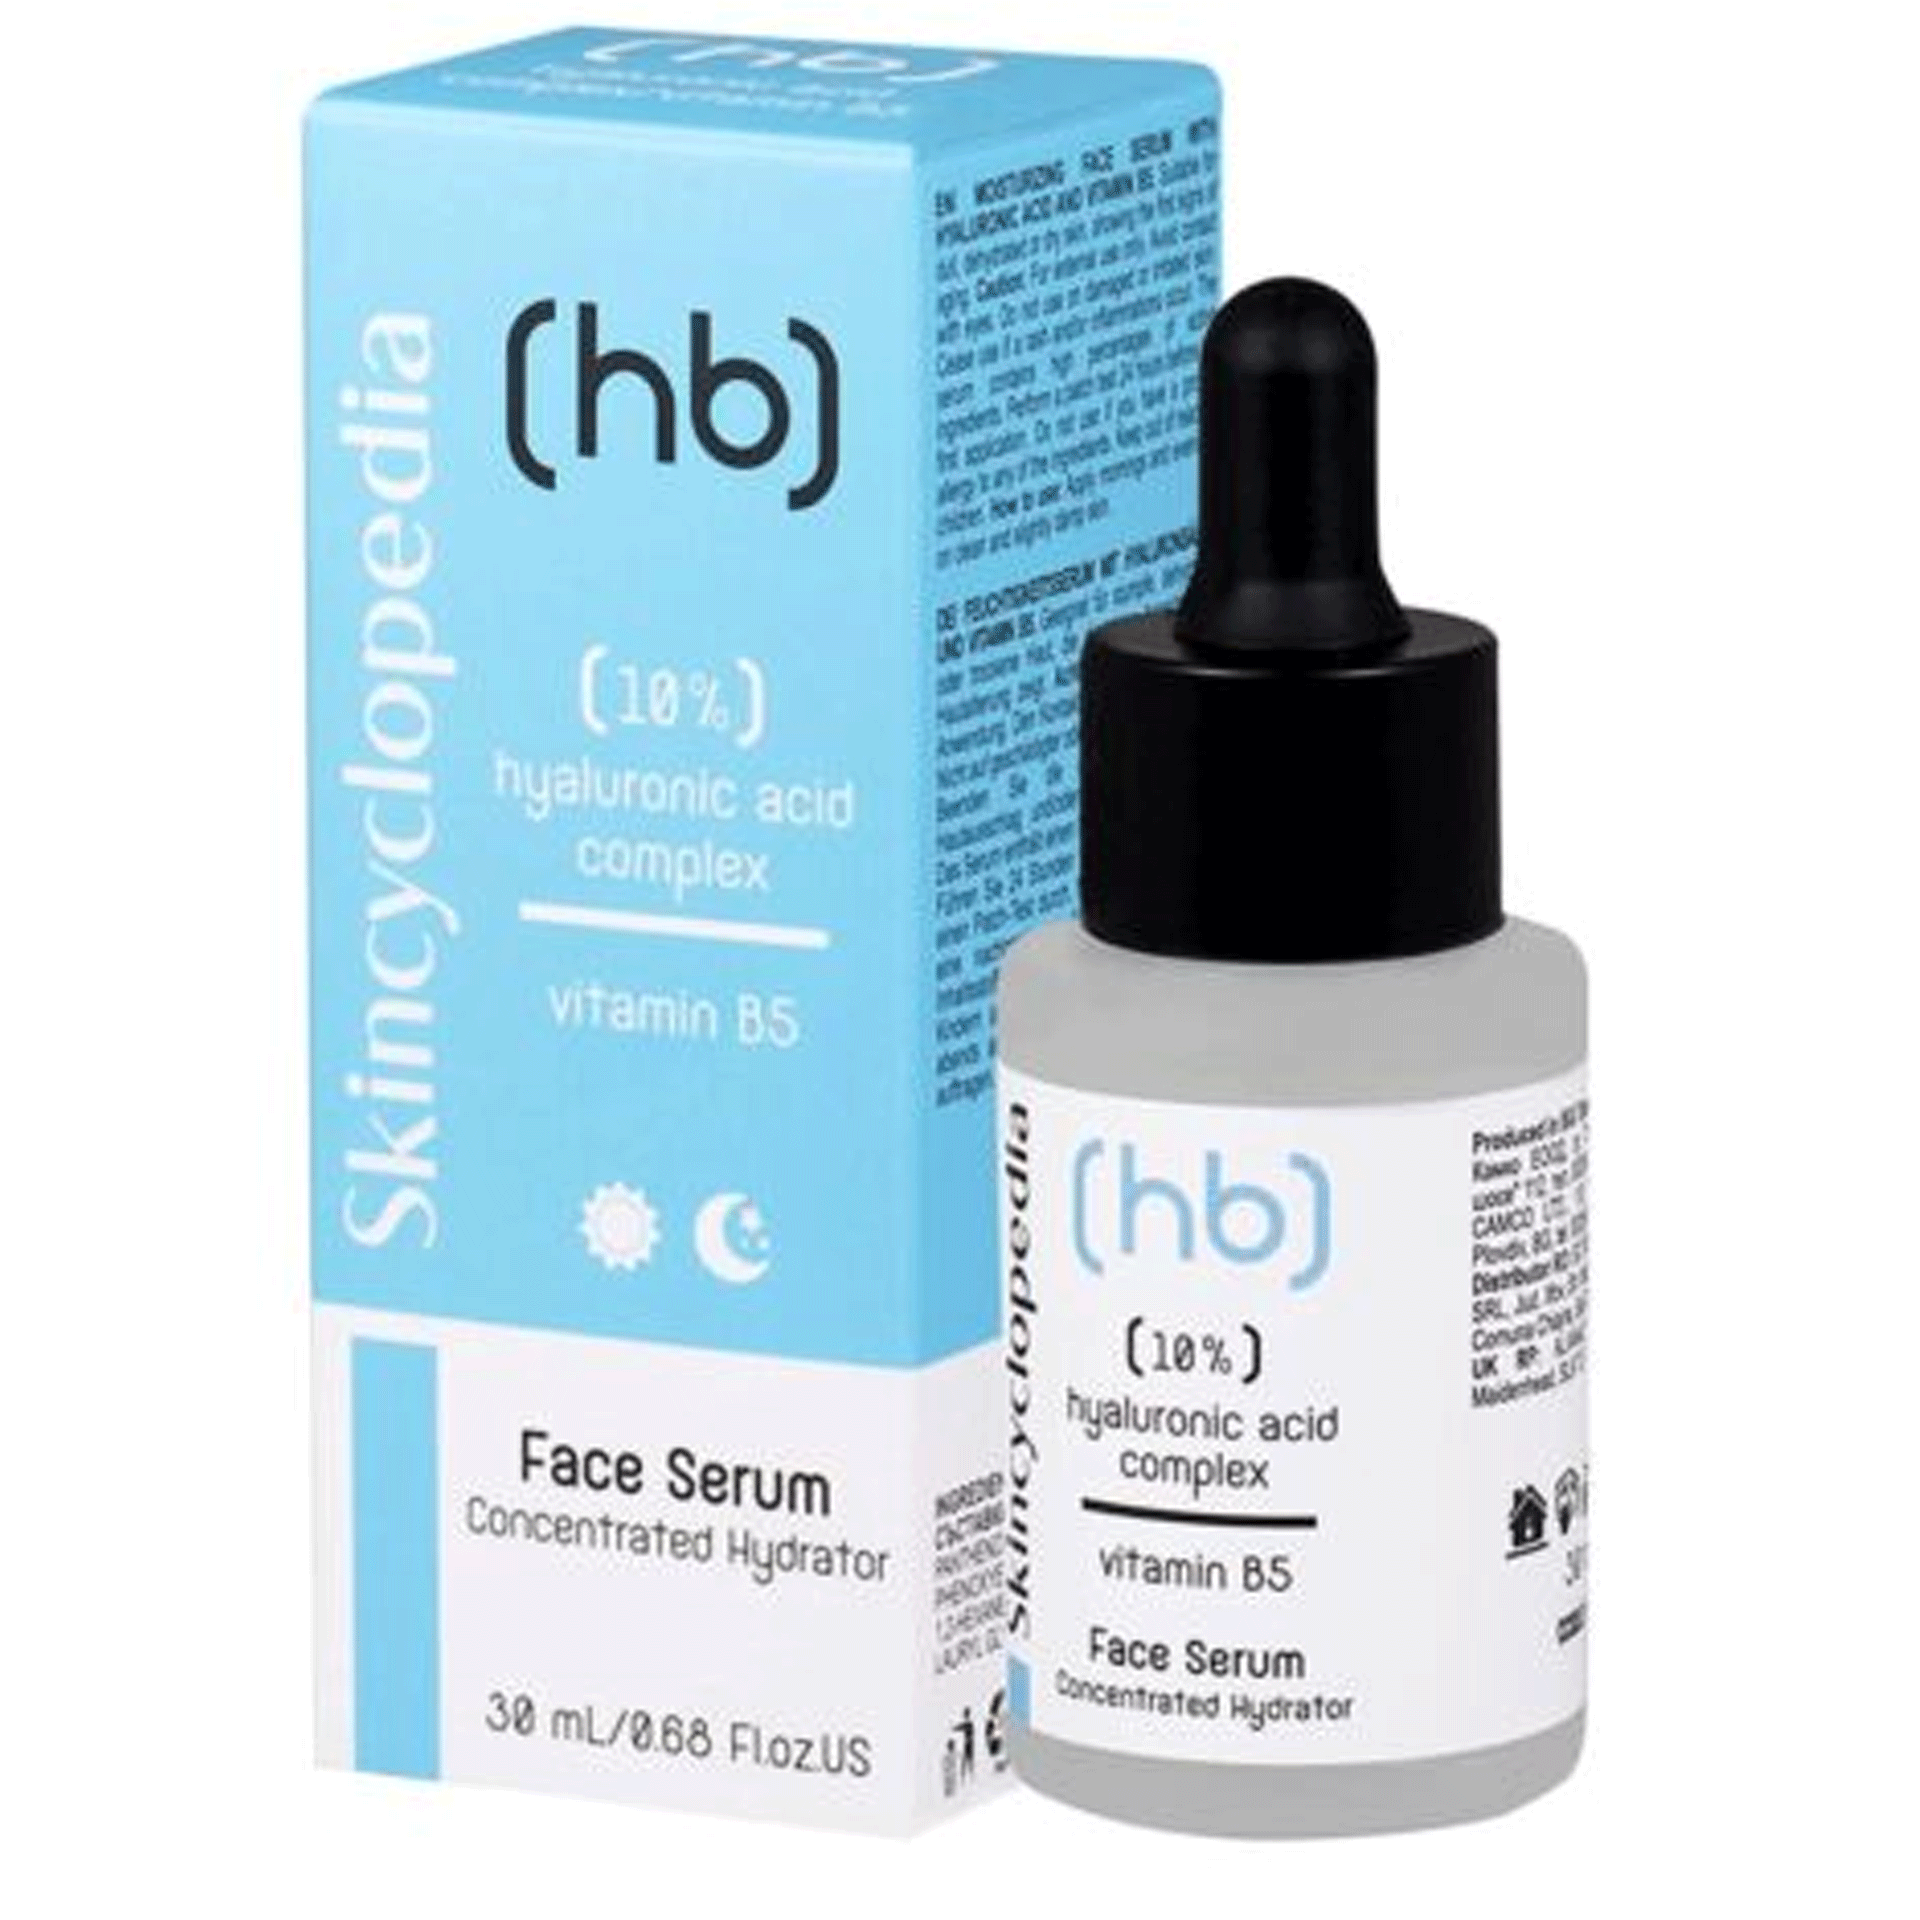 Hb Skincyclopedia Face Serum Concentrated Hydrator, 30ml